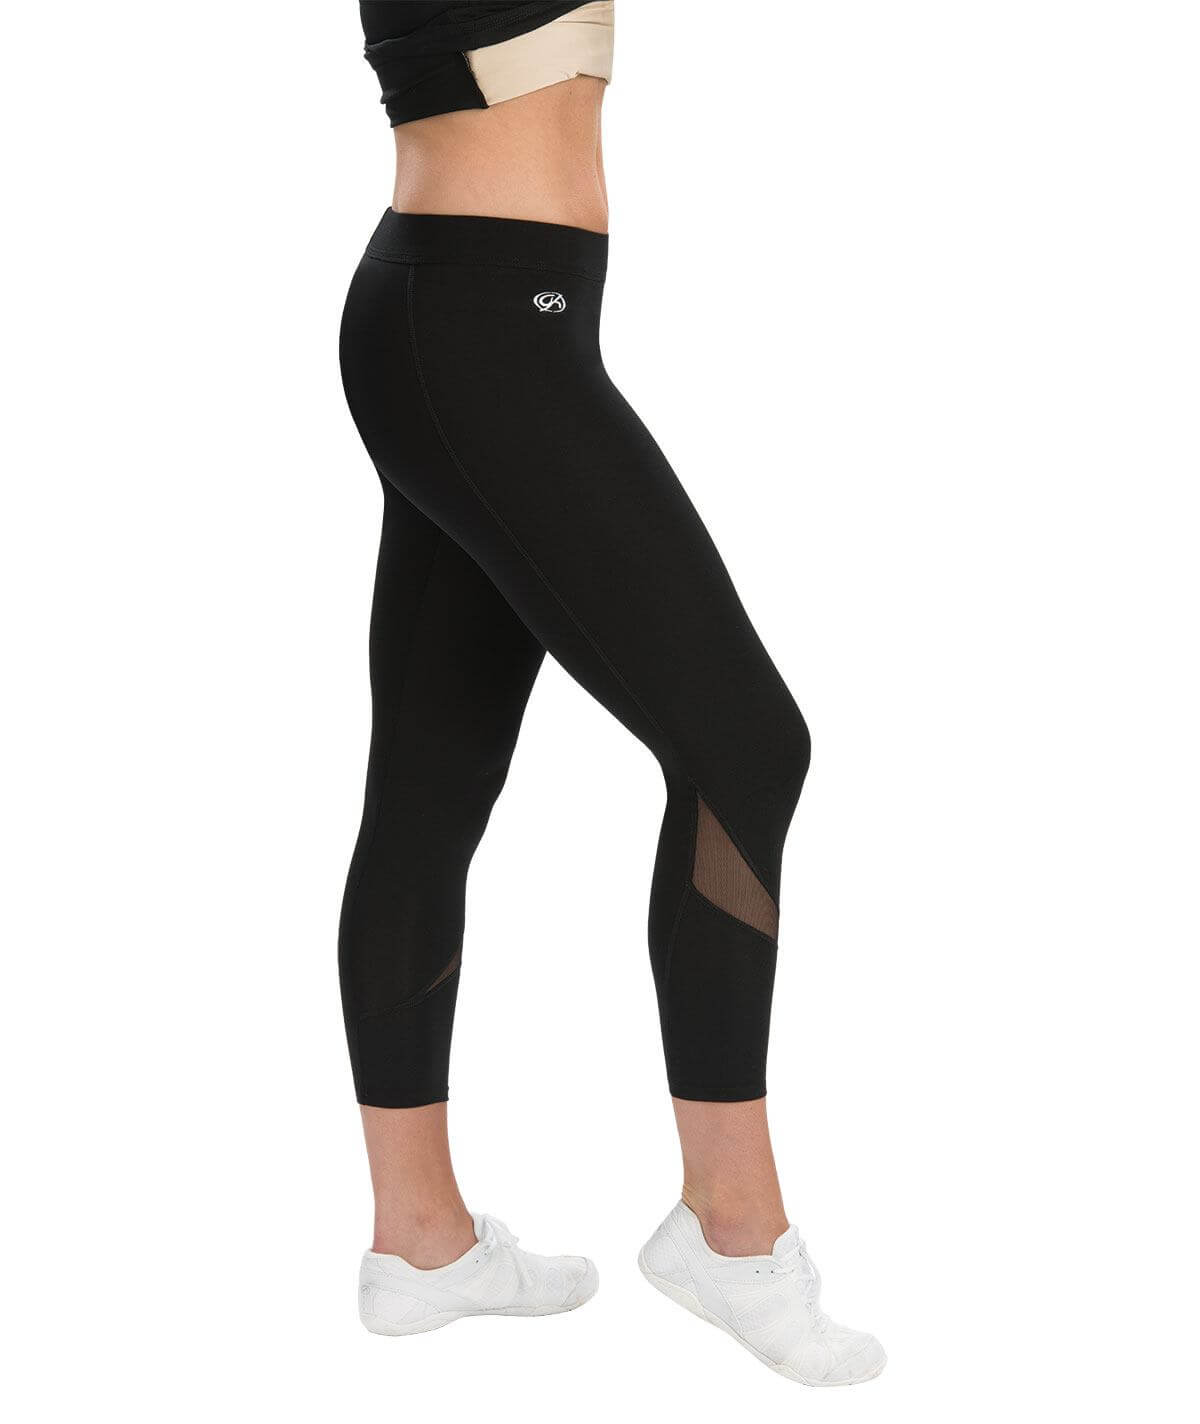 GK All Star 7/8 Cheer Tight With Mesh Accent